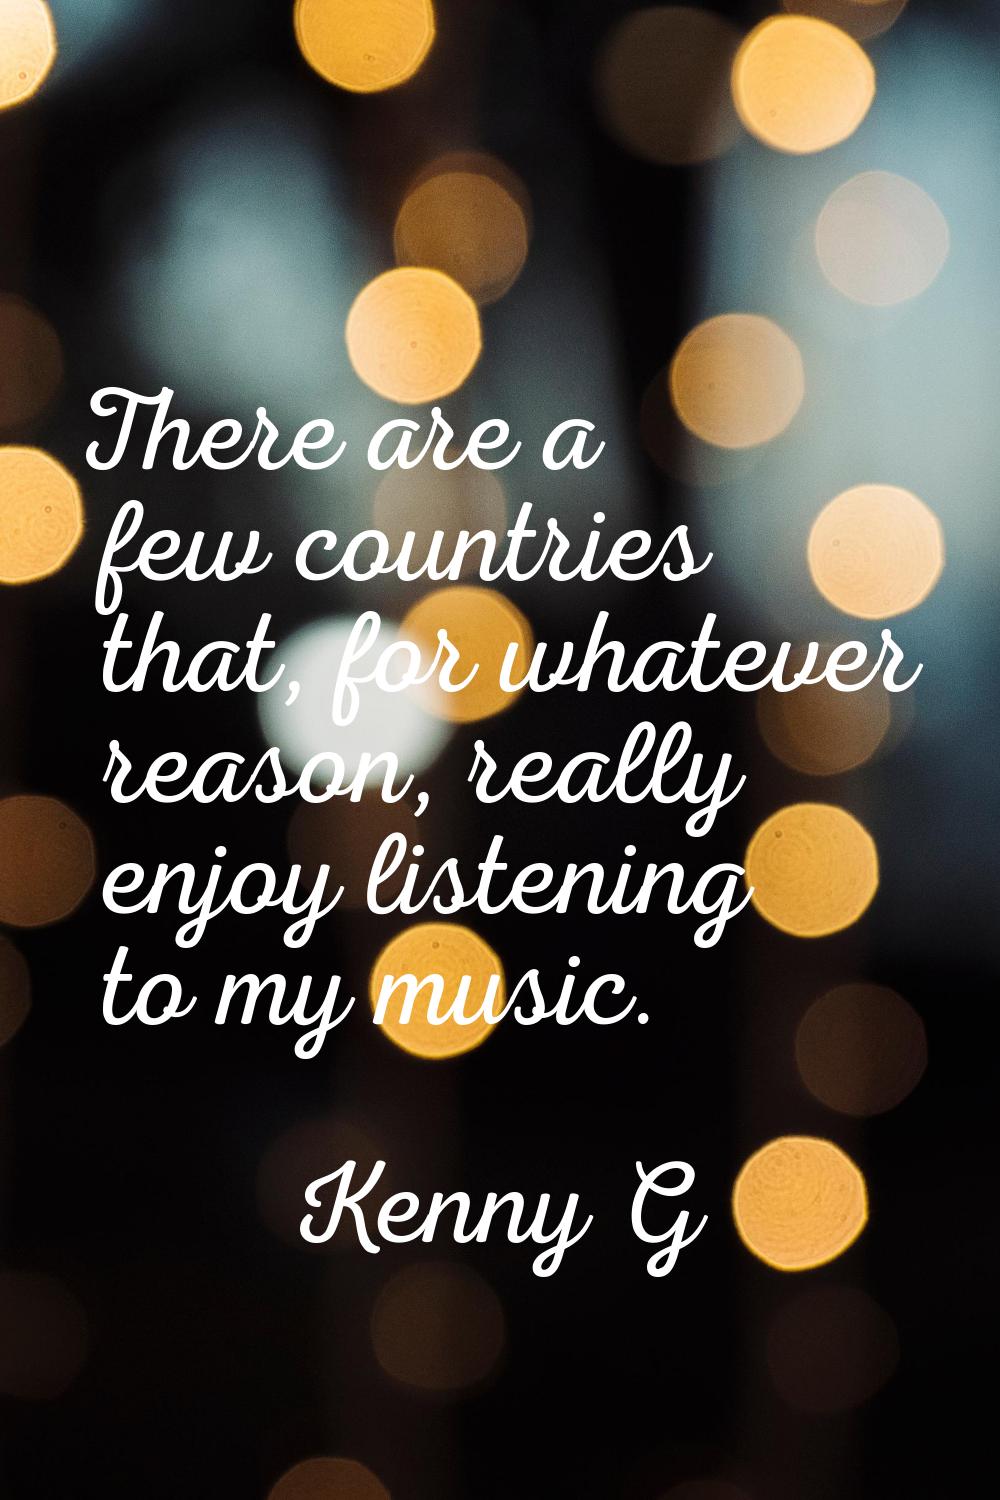 There are a few countries that, for whatever reason, really enjoy listening to my music.